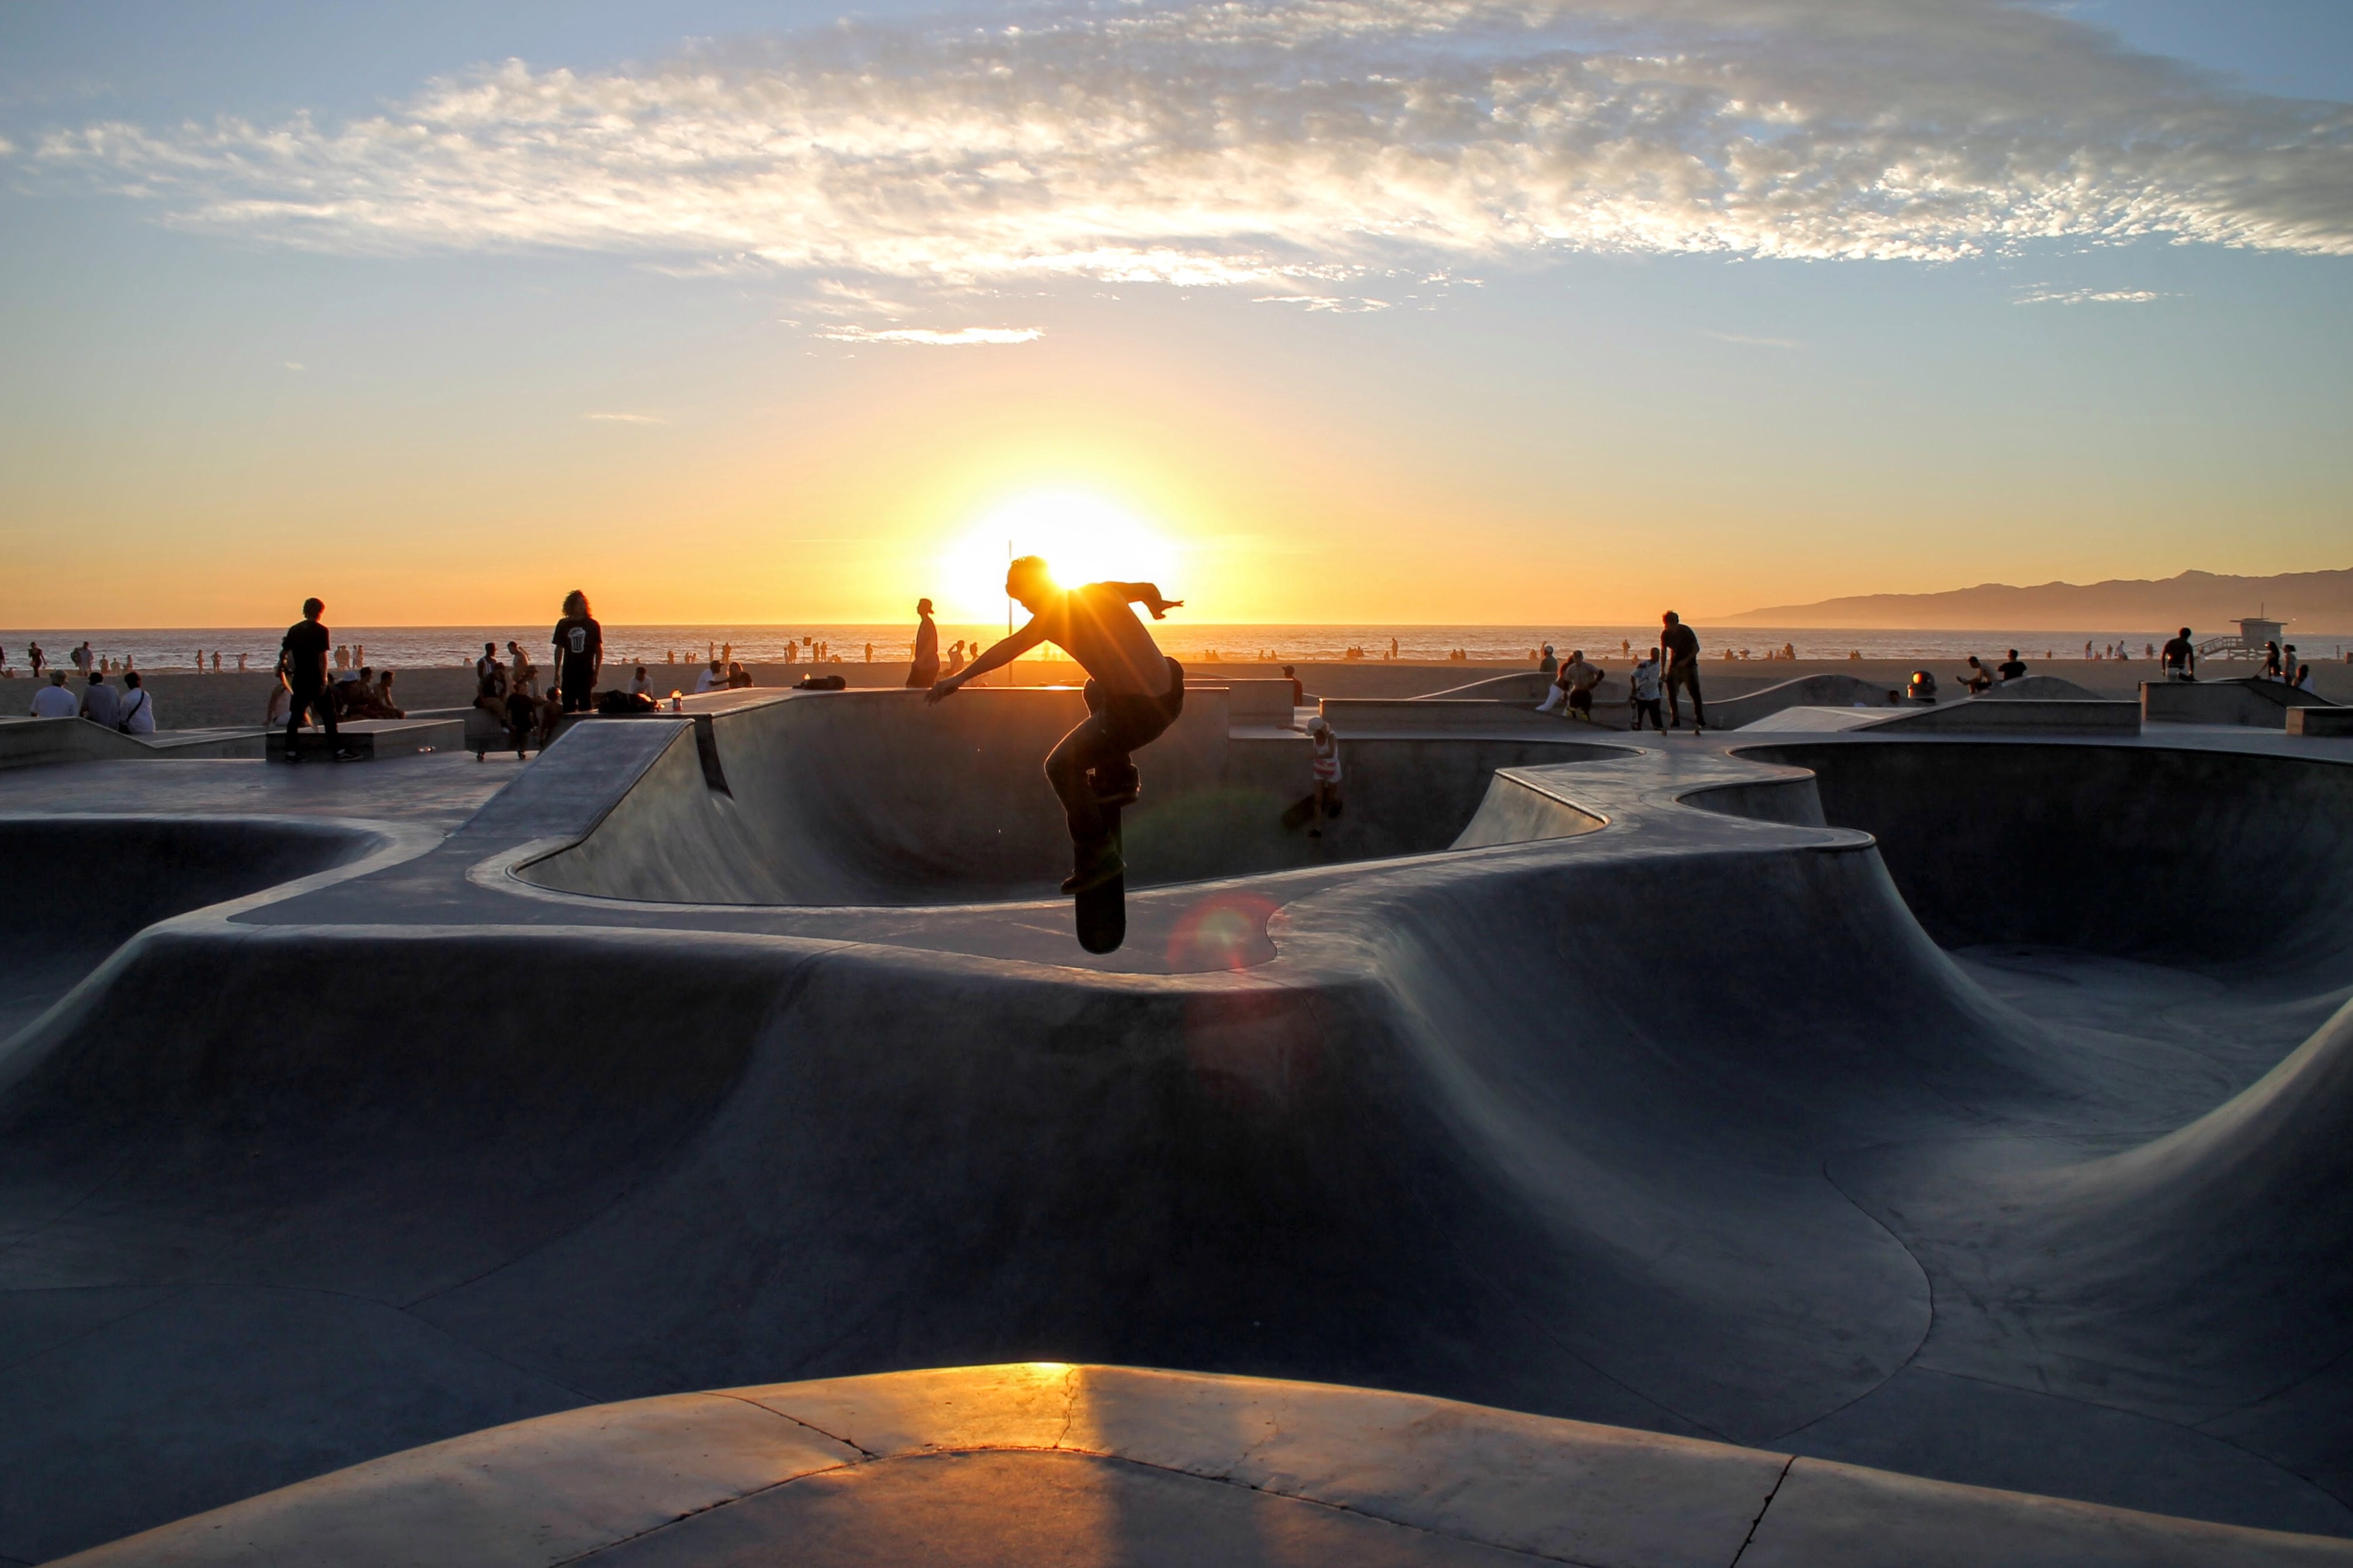 Skateboarding at Sunset, Activity, Board, People, Skate, HQ Photo